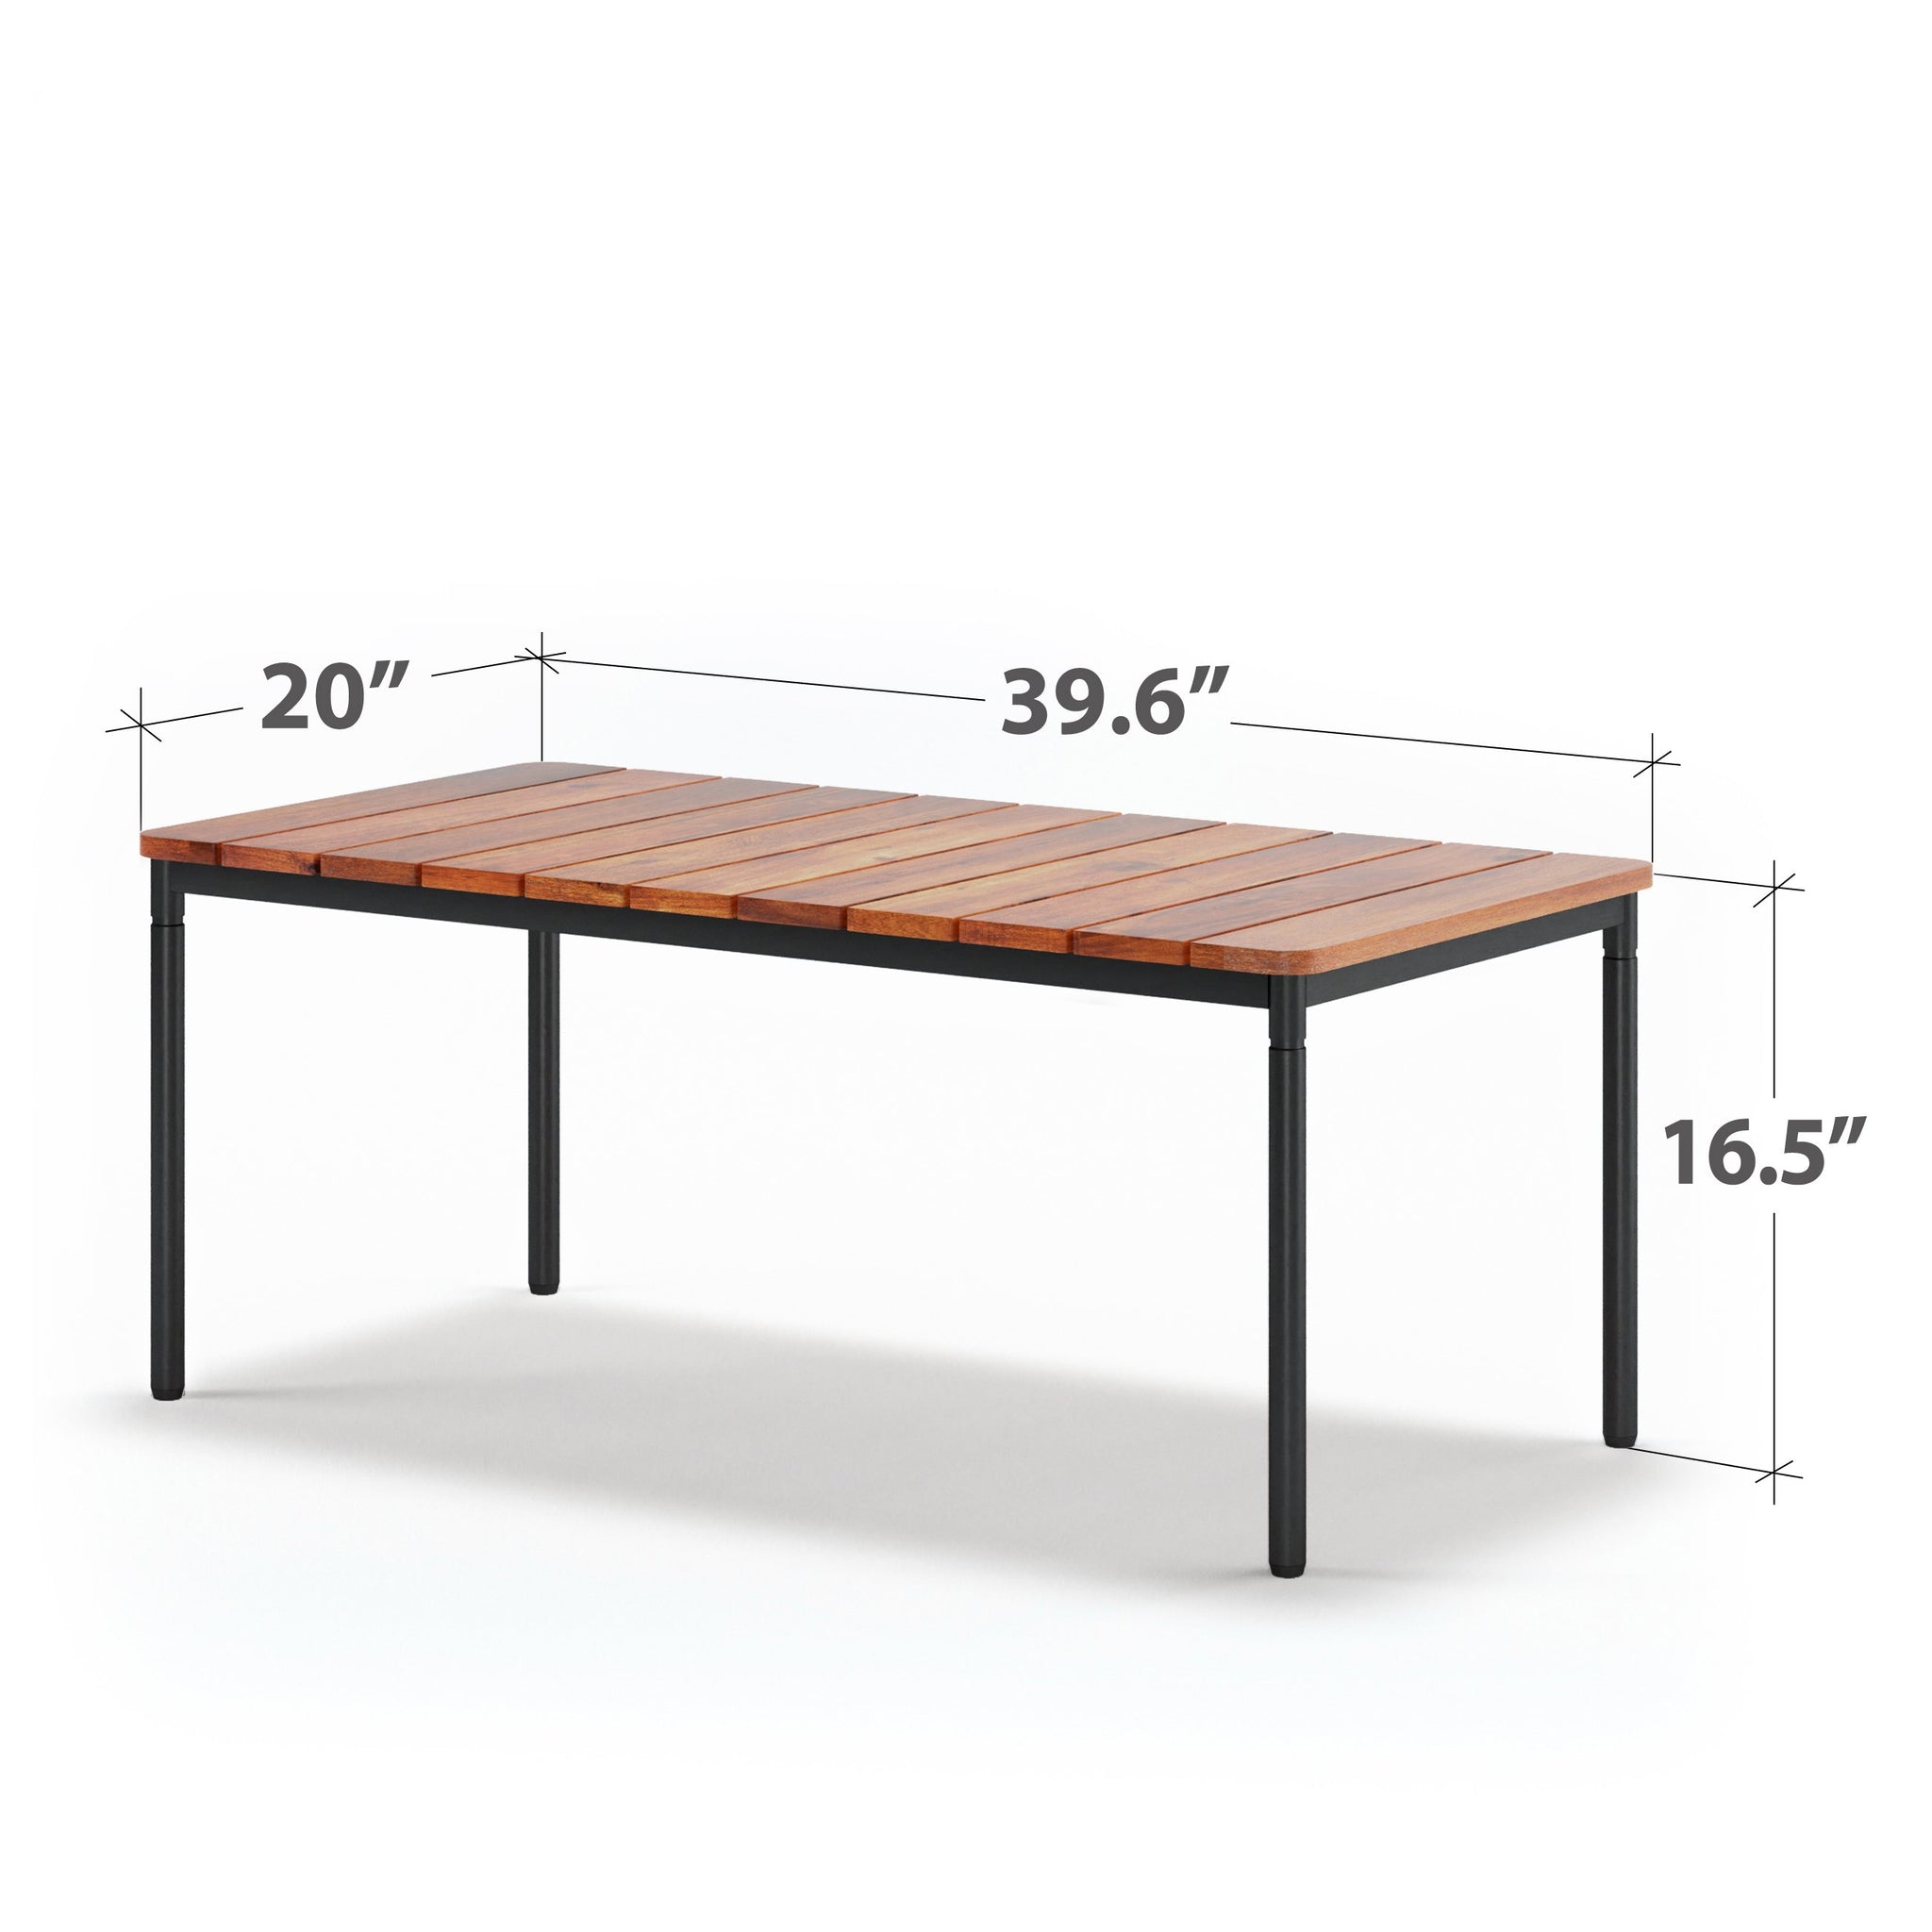 Savannah Aluminum and Acacia Wood Outdoor Table with Waterproof Cover